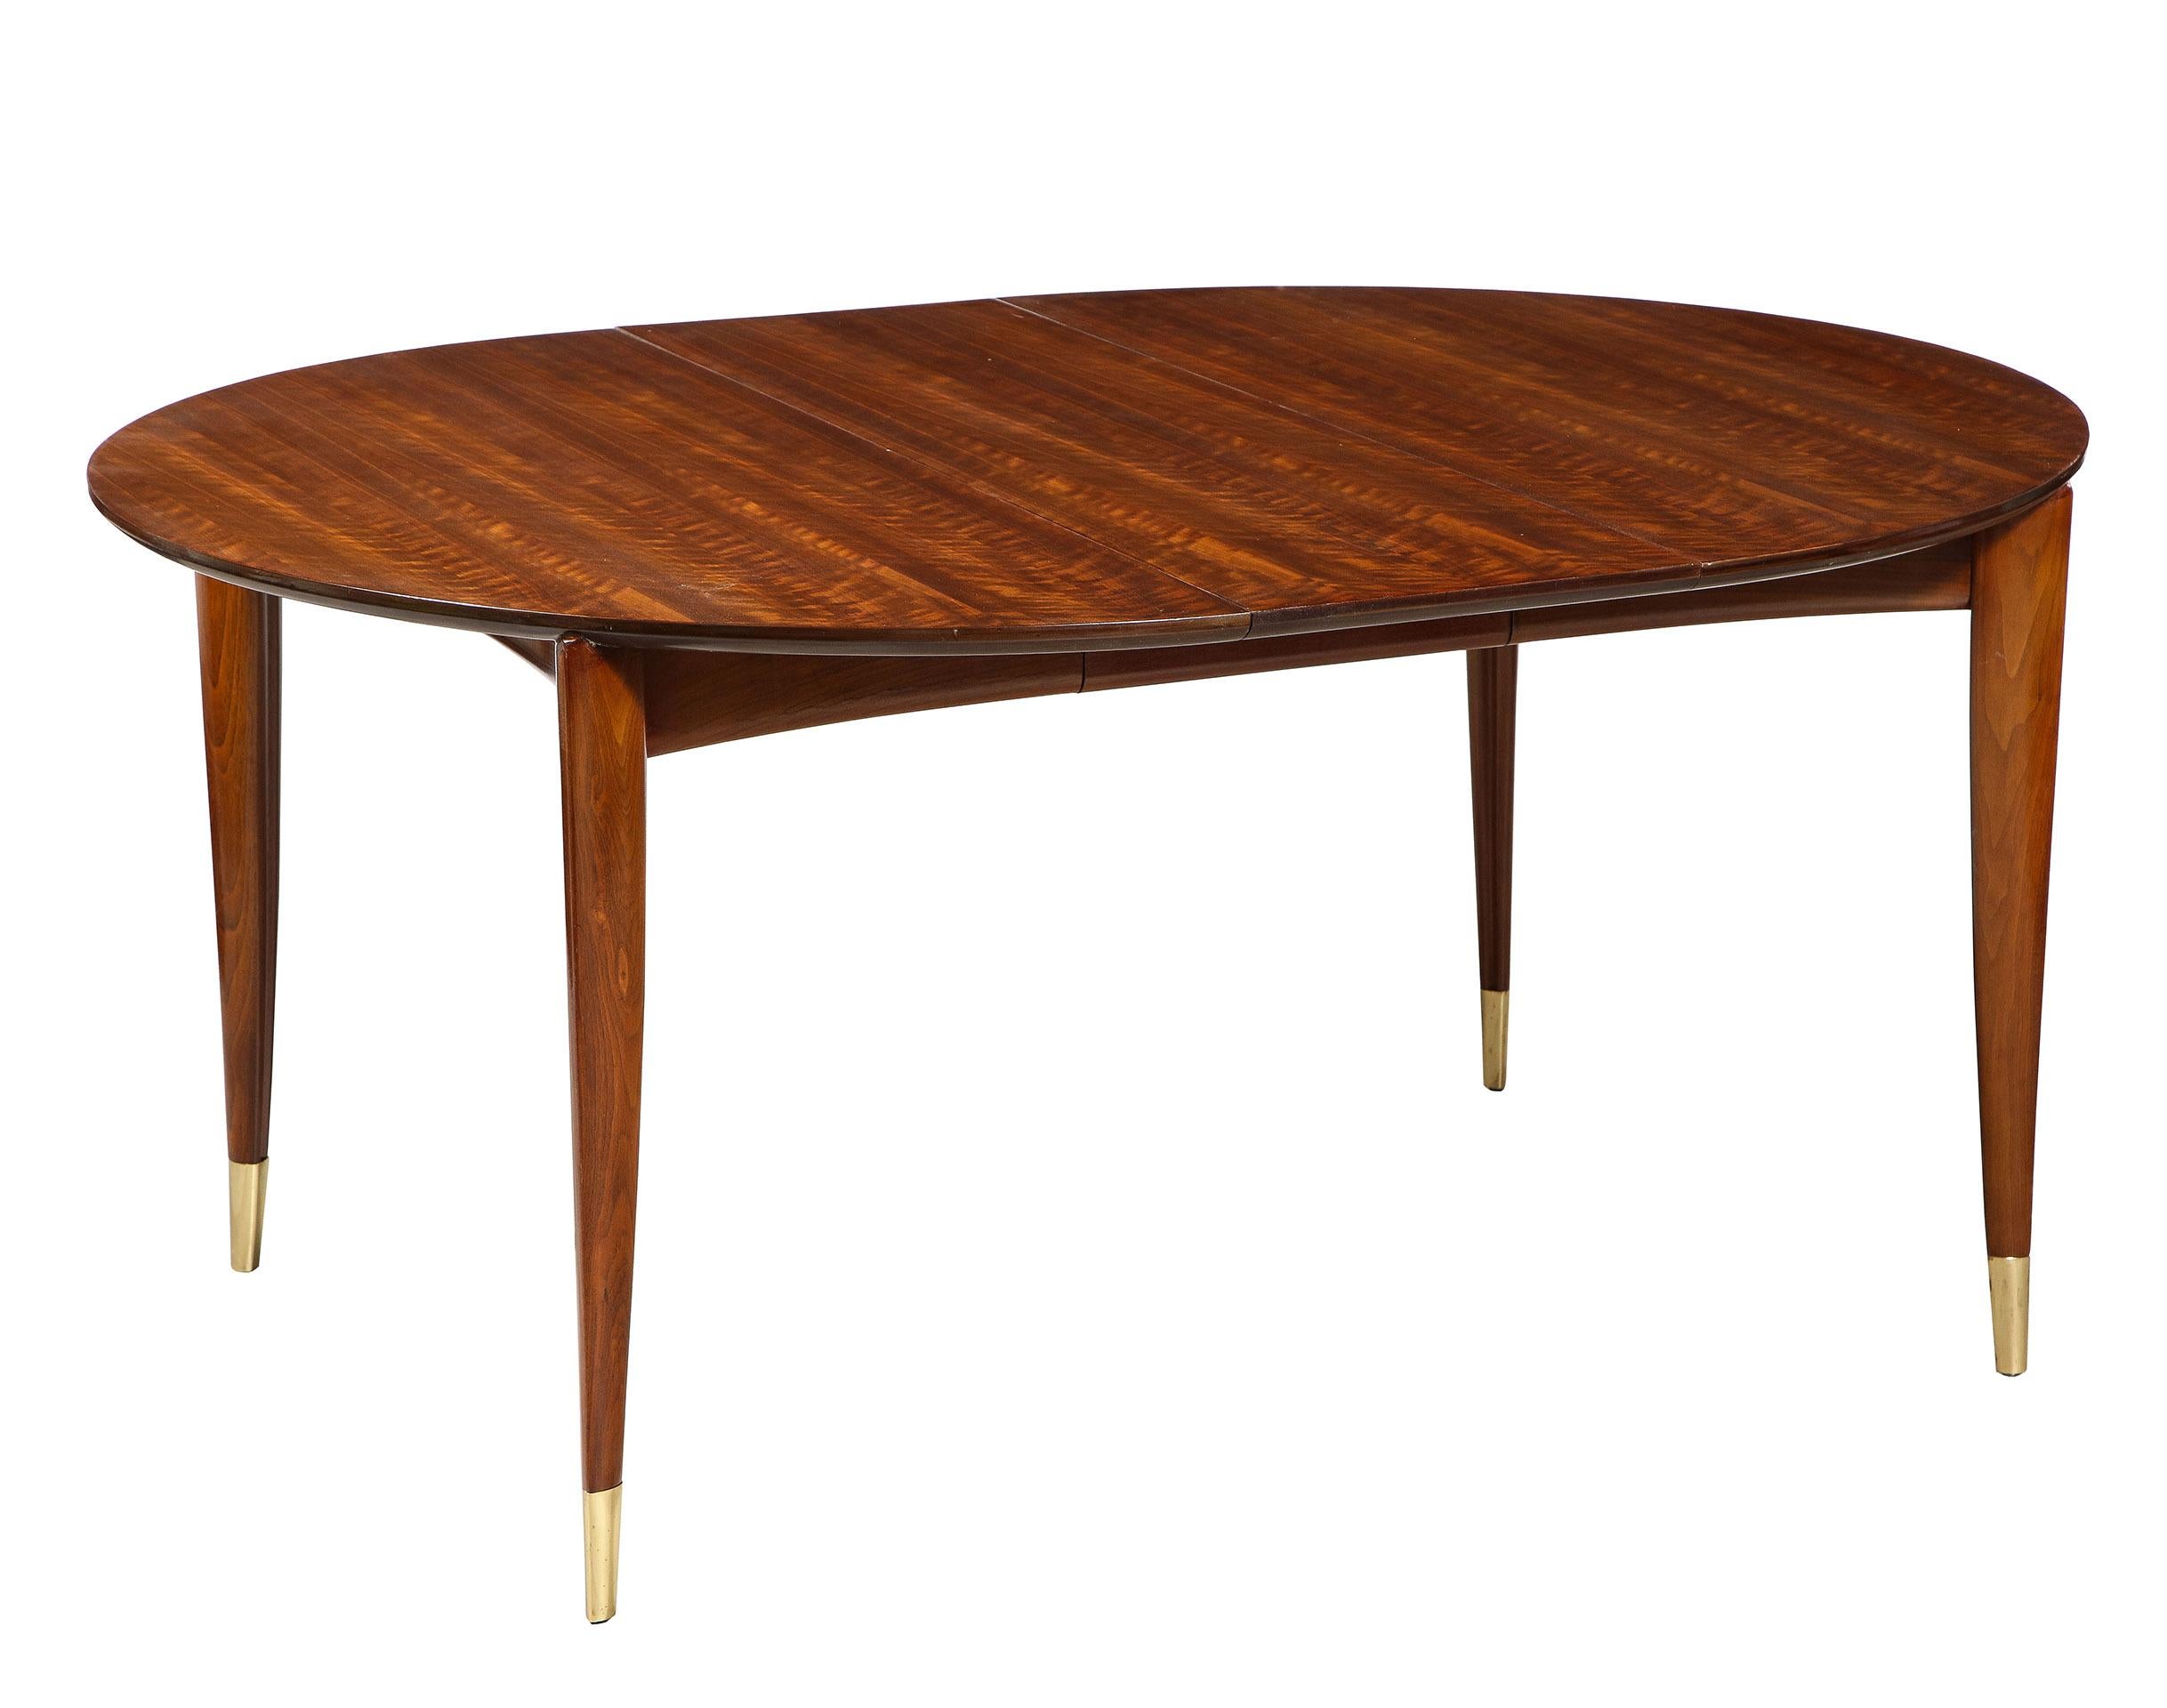 Having a lovely lacquer finish, the walnut dining table for M. Singer and Sons, starts as a round breakfast size table and expands to accommodate 10-12 chairs. The lovely grained top over a slightly concave apron. With 4 tapered legs with brass